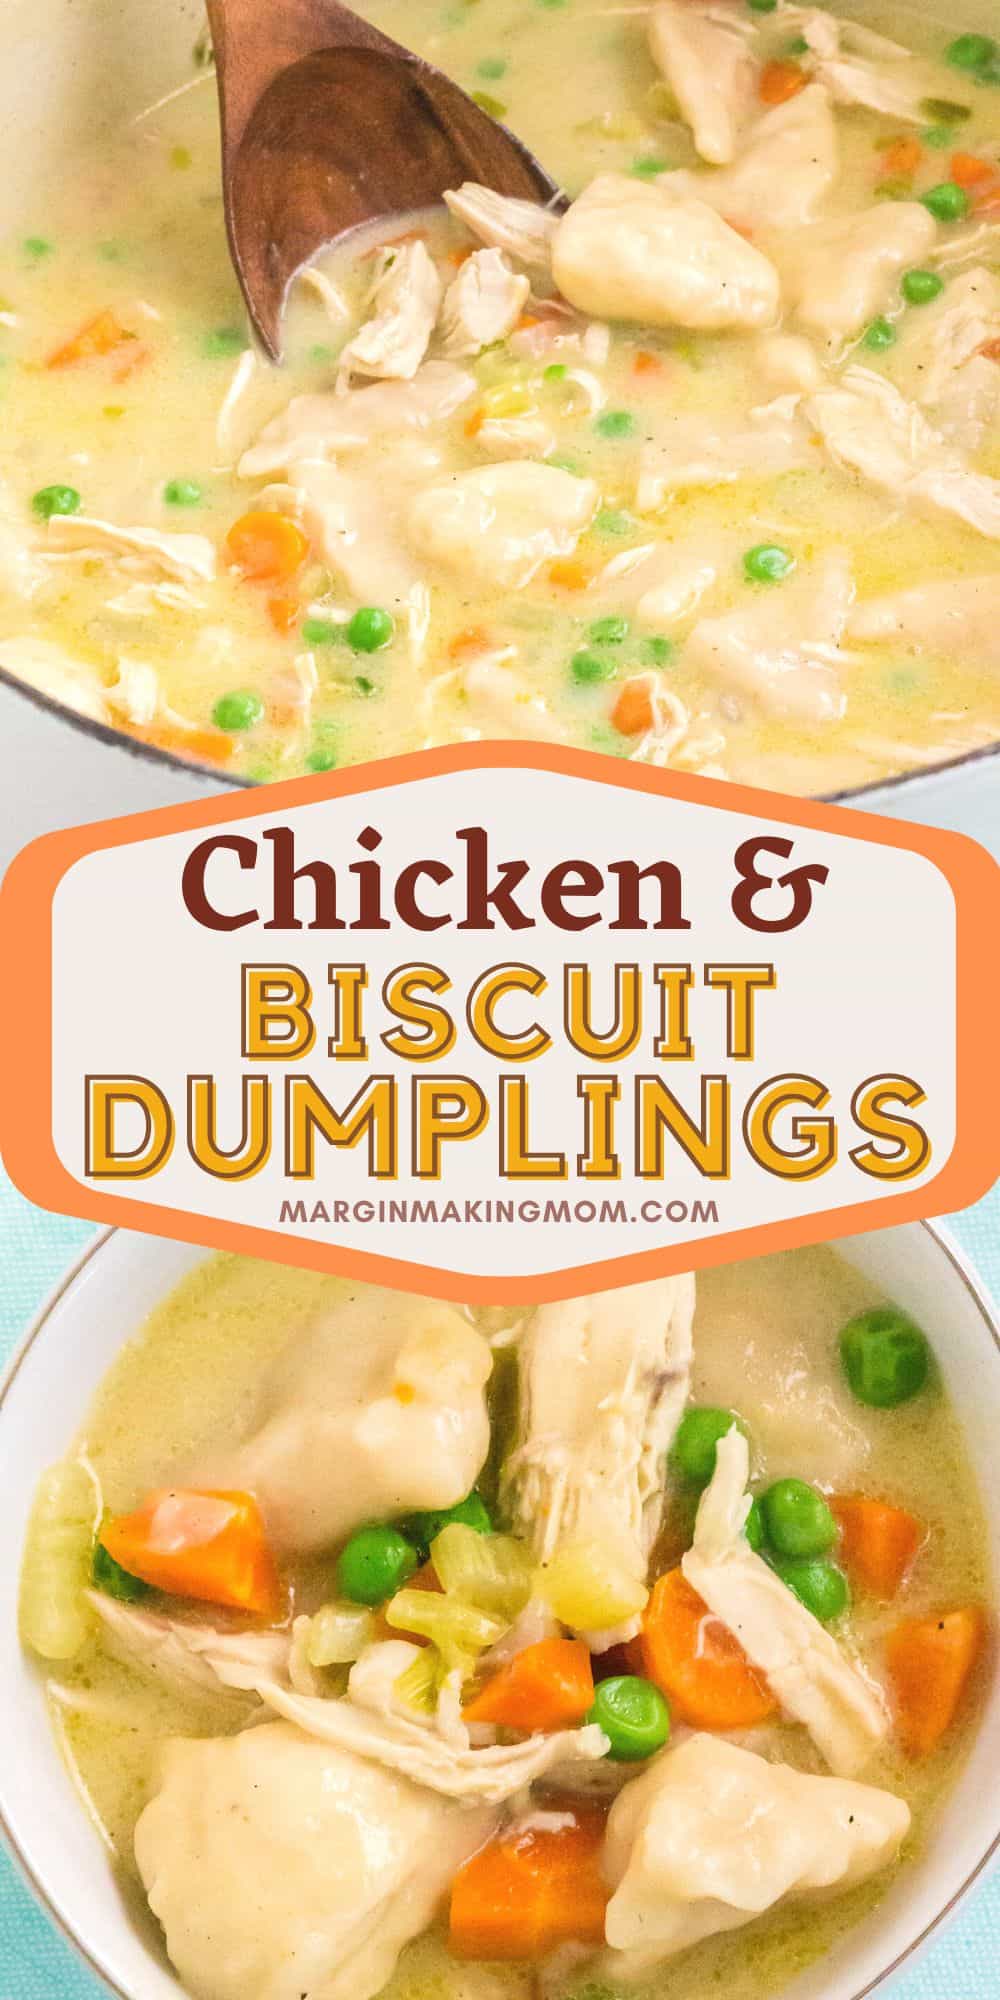 two photos; one shows a dutch oven of chicken and biscuit dumplings with a wooden spoon in it, the other shows a bowl of chicken and dumplings made with biscuits.